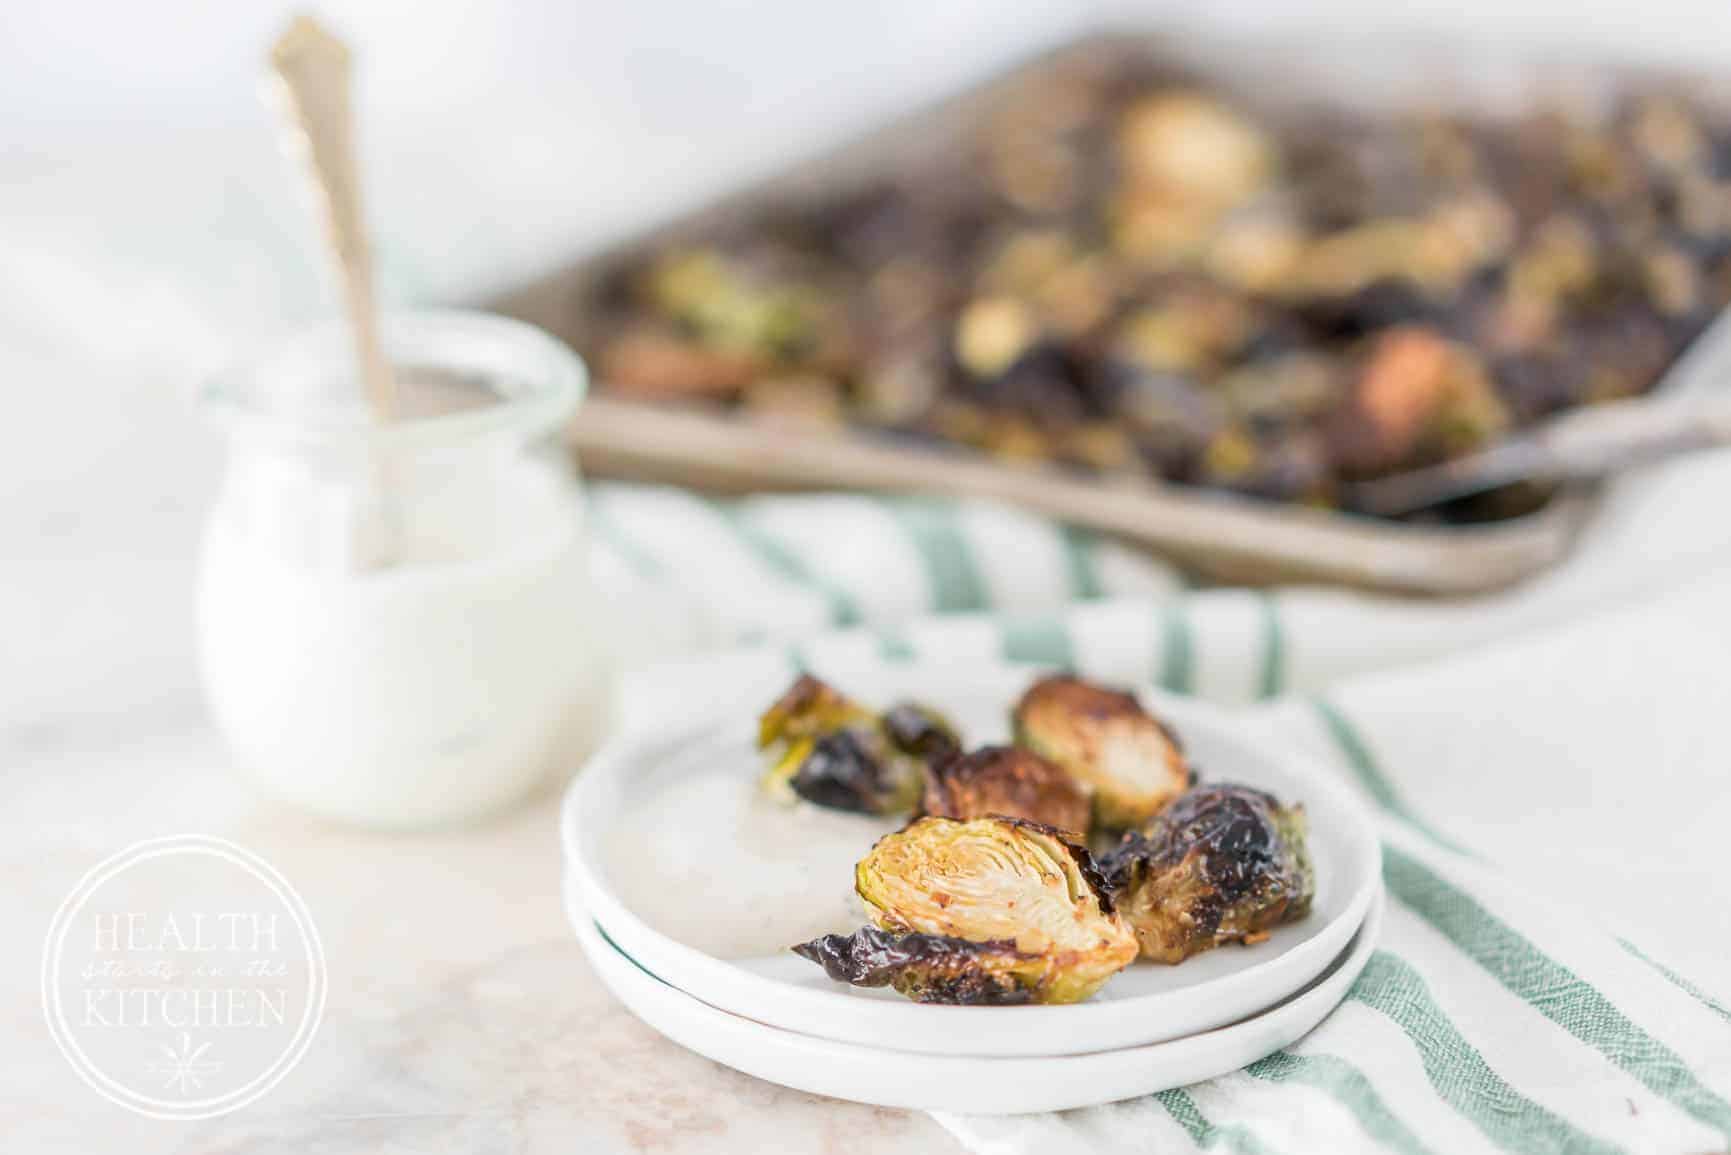 Oven Roasted Crispy Brussels Sprouts with Horseradish Sauce {Keto, Low-Carb & Paleo}